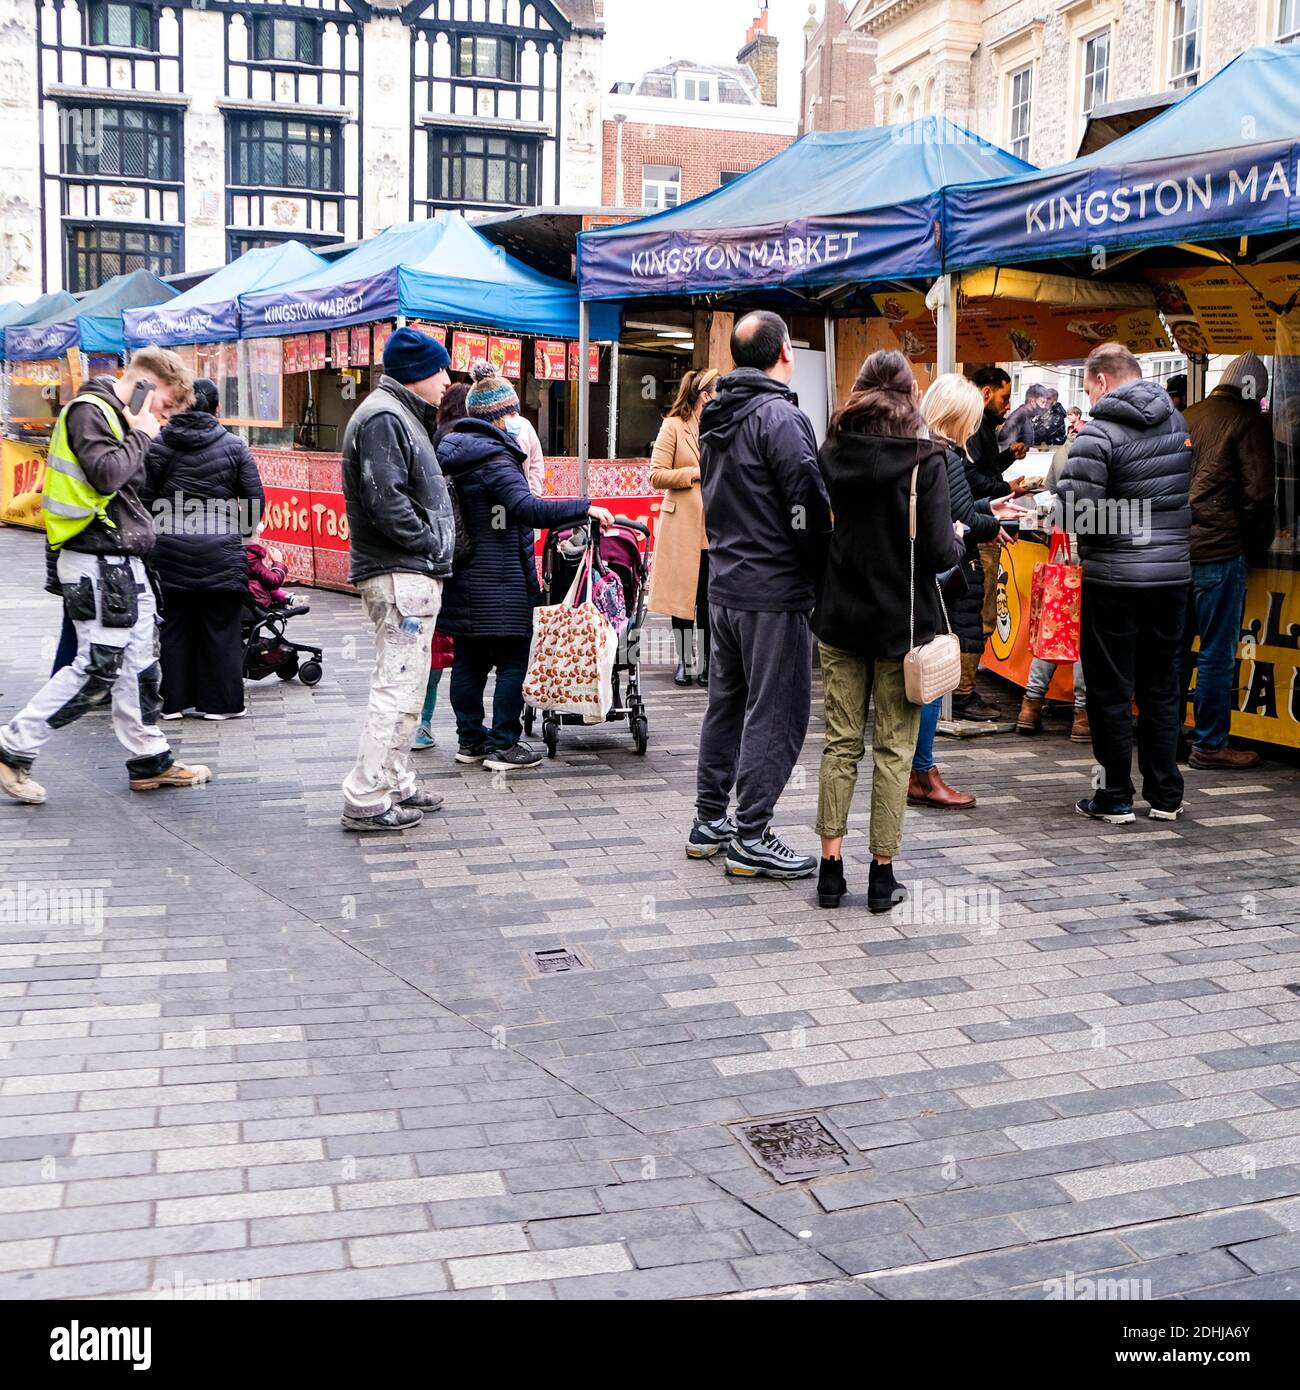 Kingston London UK, December 09 2020, Shoppers Waiting In Line At A Pop Up  Market Food Stall Stock Photo - Alamy